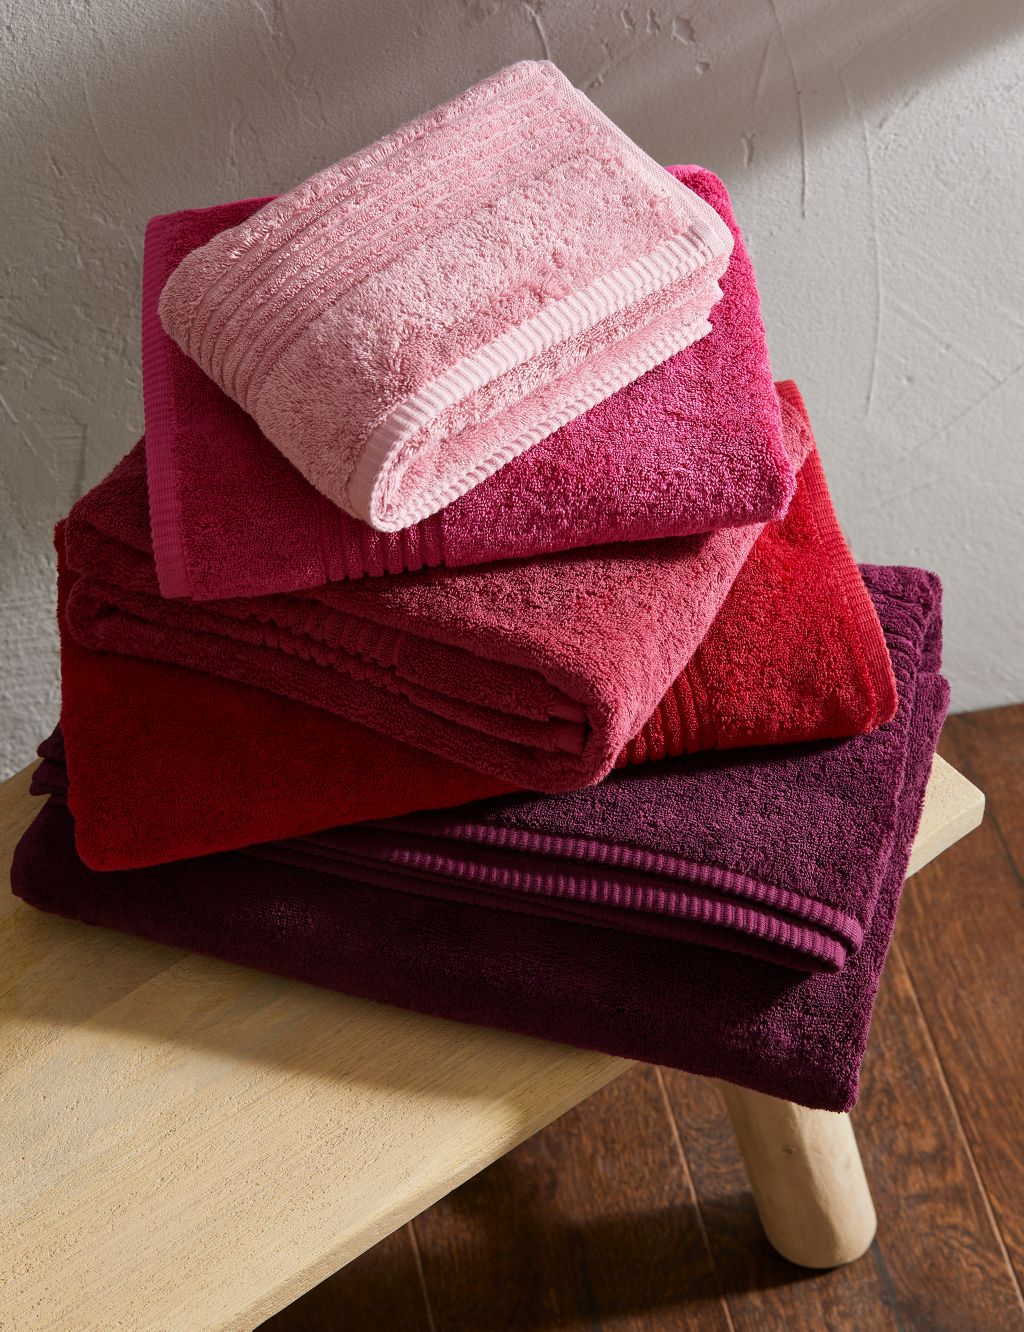 RED TOWELS